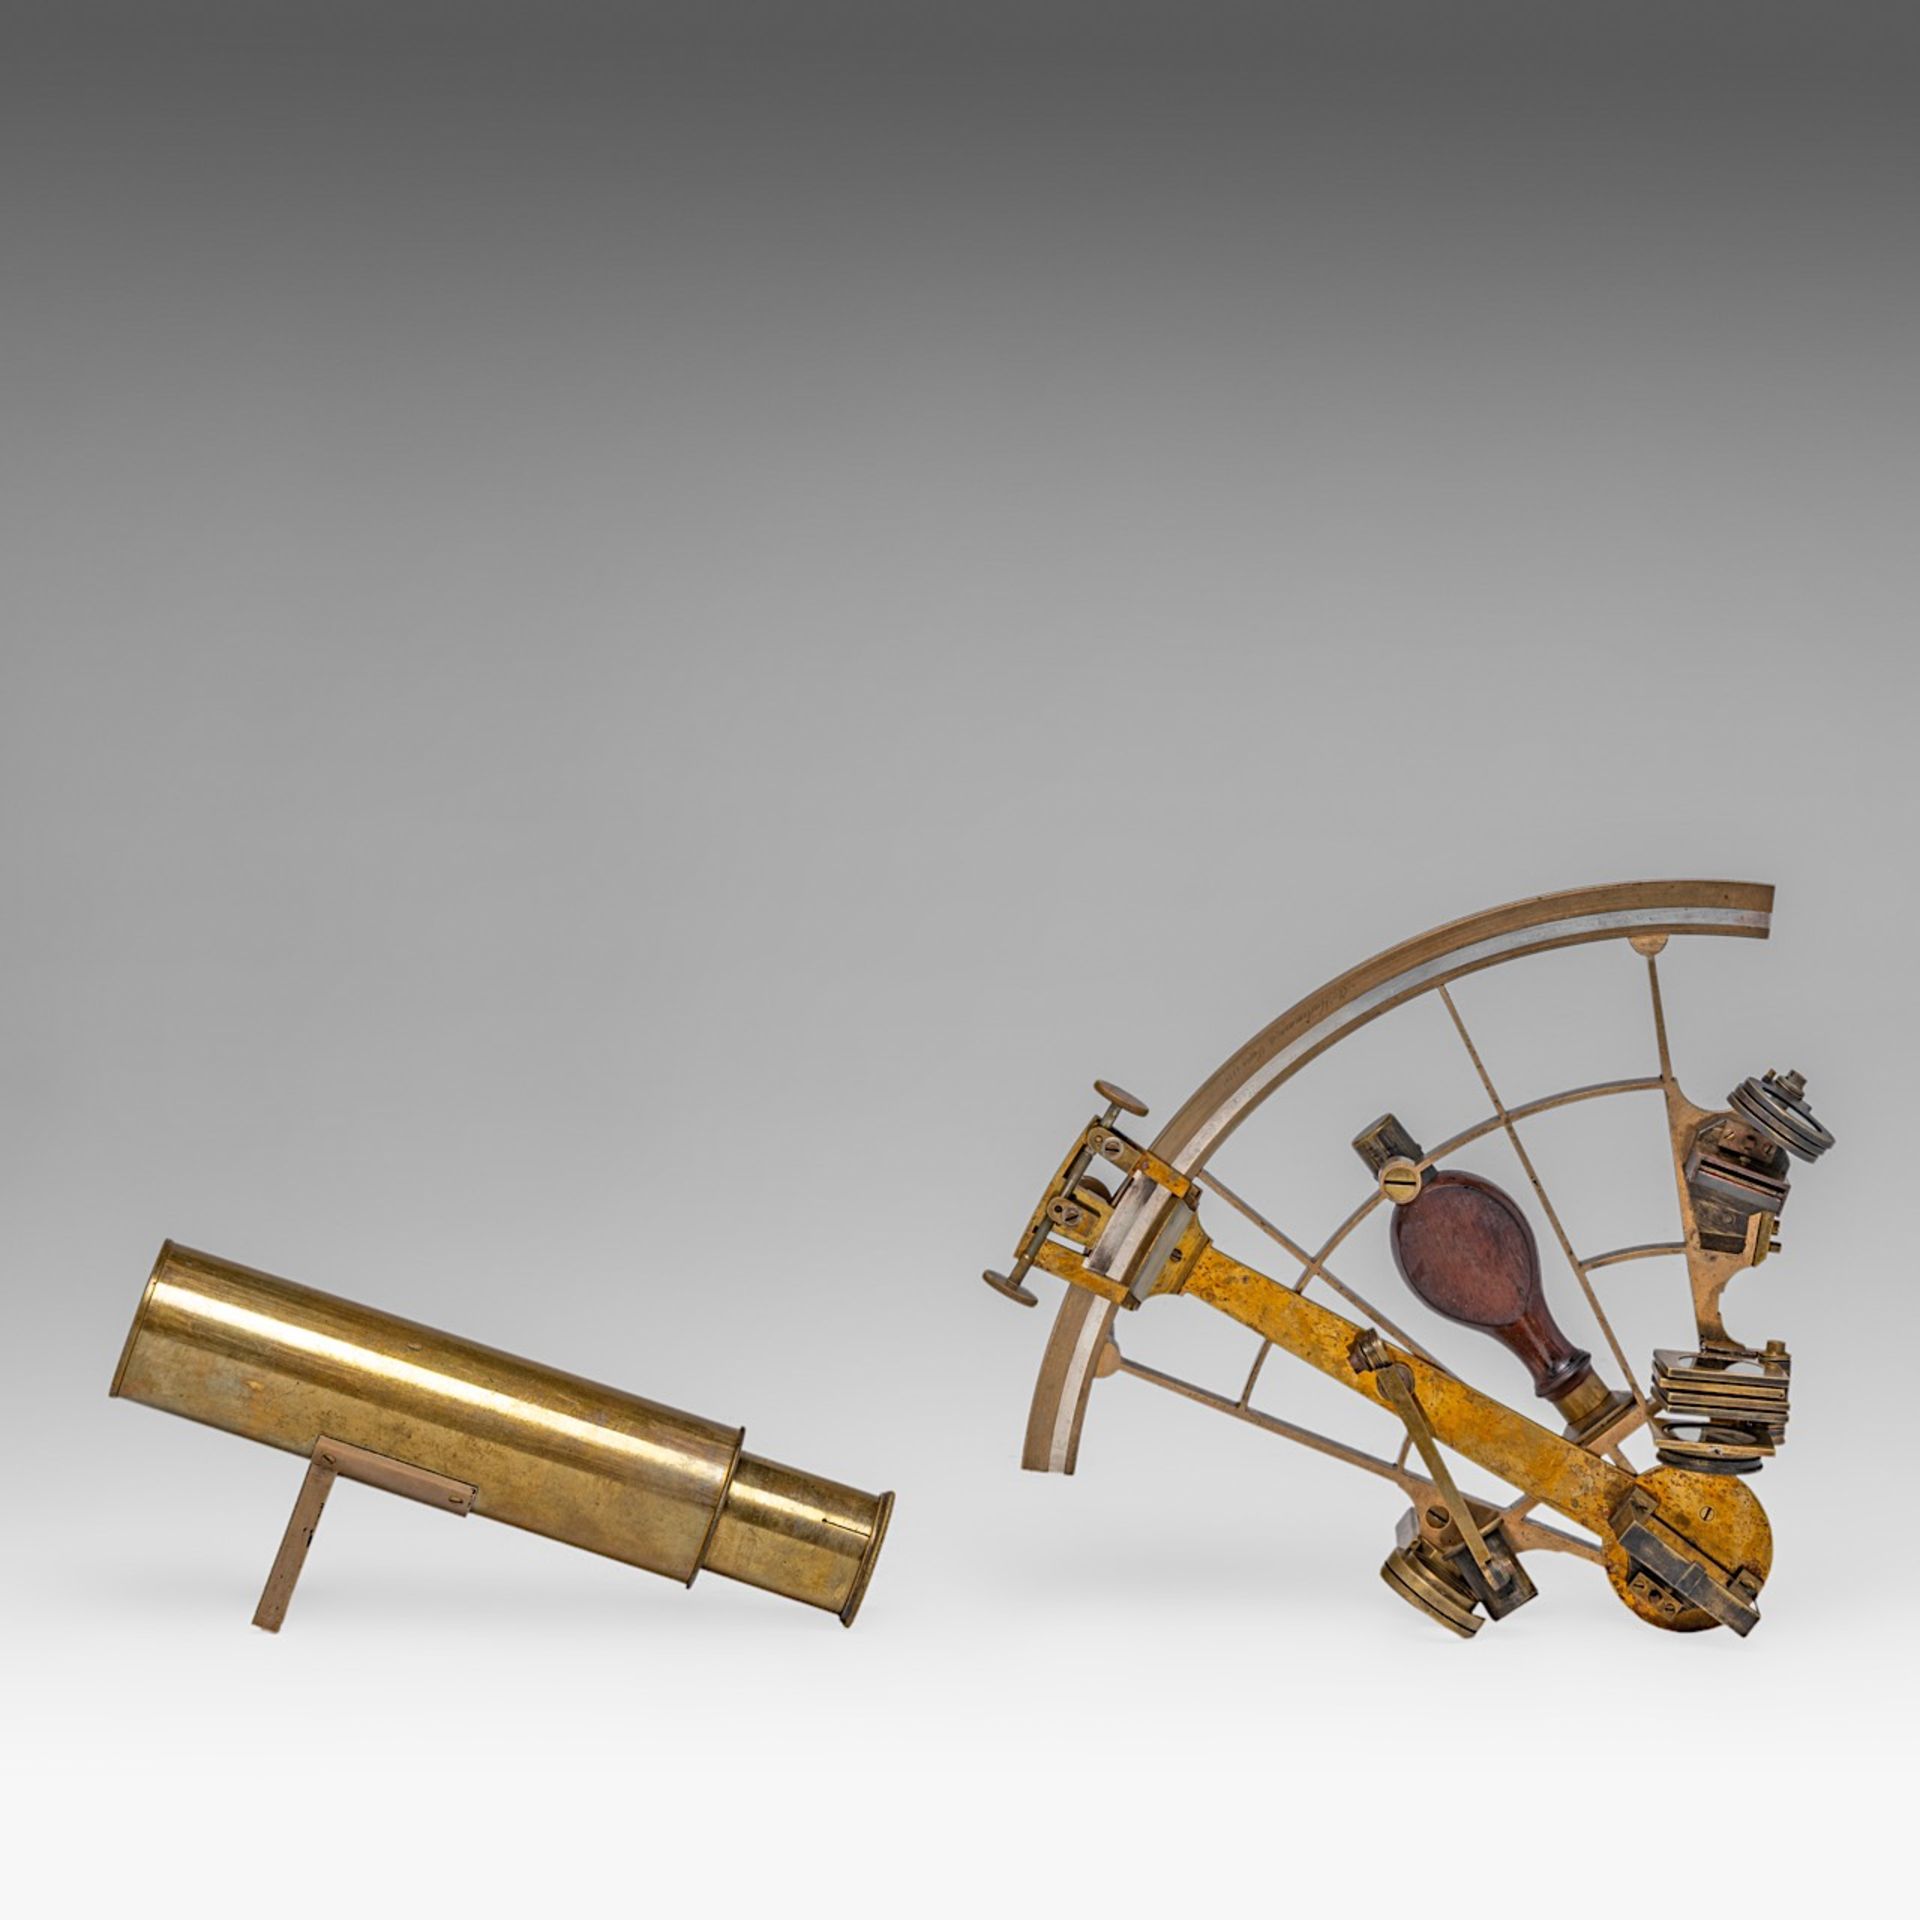 A late 19thC French sextant and binoculars, by A. Hurlimann, Paris - Image 3 of 7